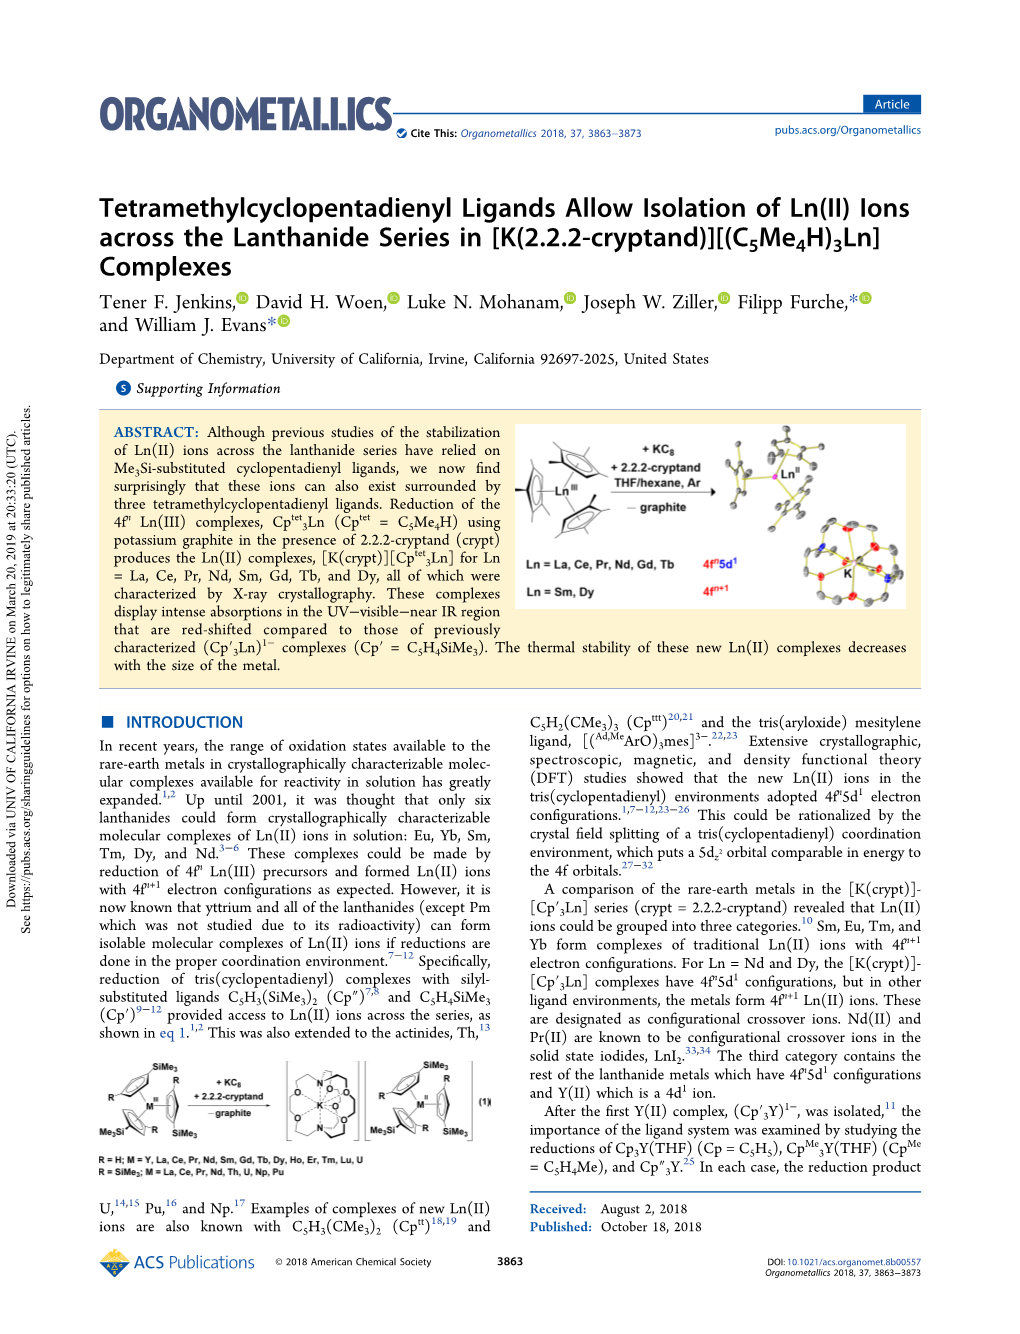 Ions Across the Lanthanide Series in [K(2.2.2-Cryptand)][(C5me4h)3Ln] Complexes Tener F